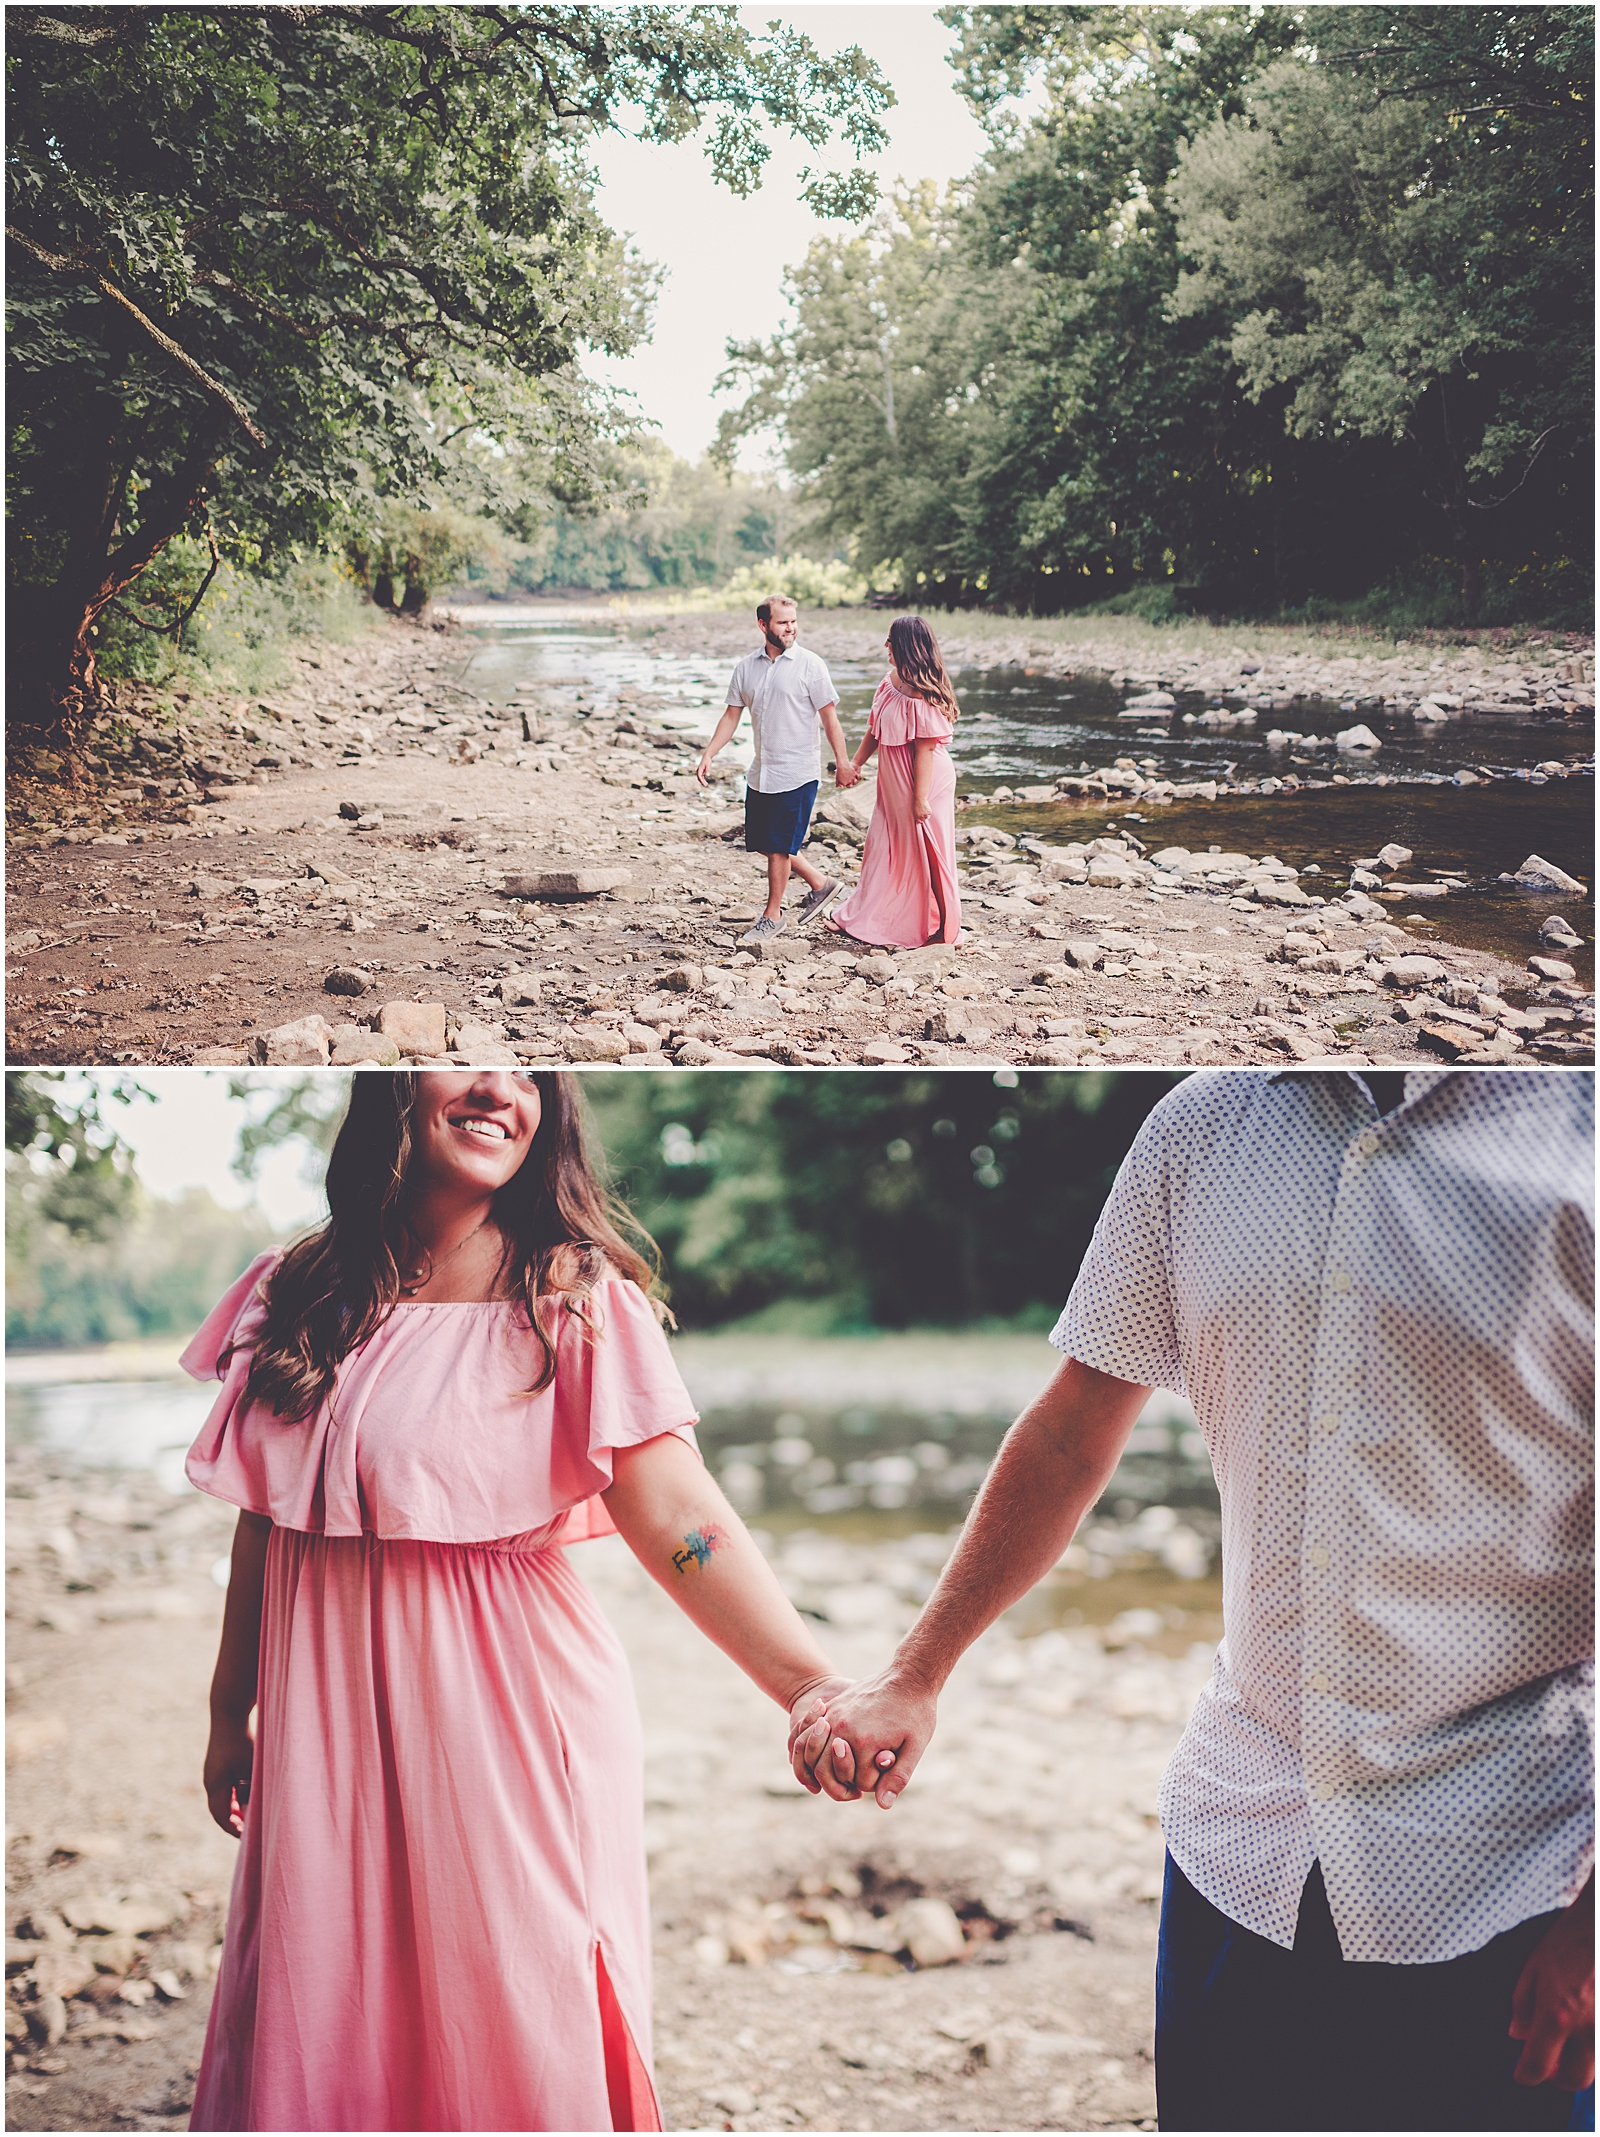 Daniela and Andrew's summer engagement photos at Kankakee River State Park with Chicagoland wedding photographer Kara Evans Photographer.